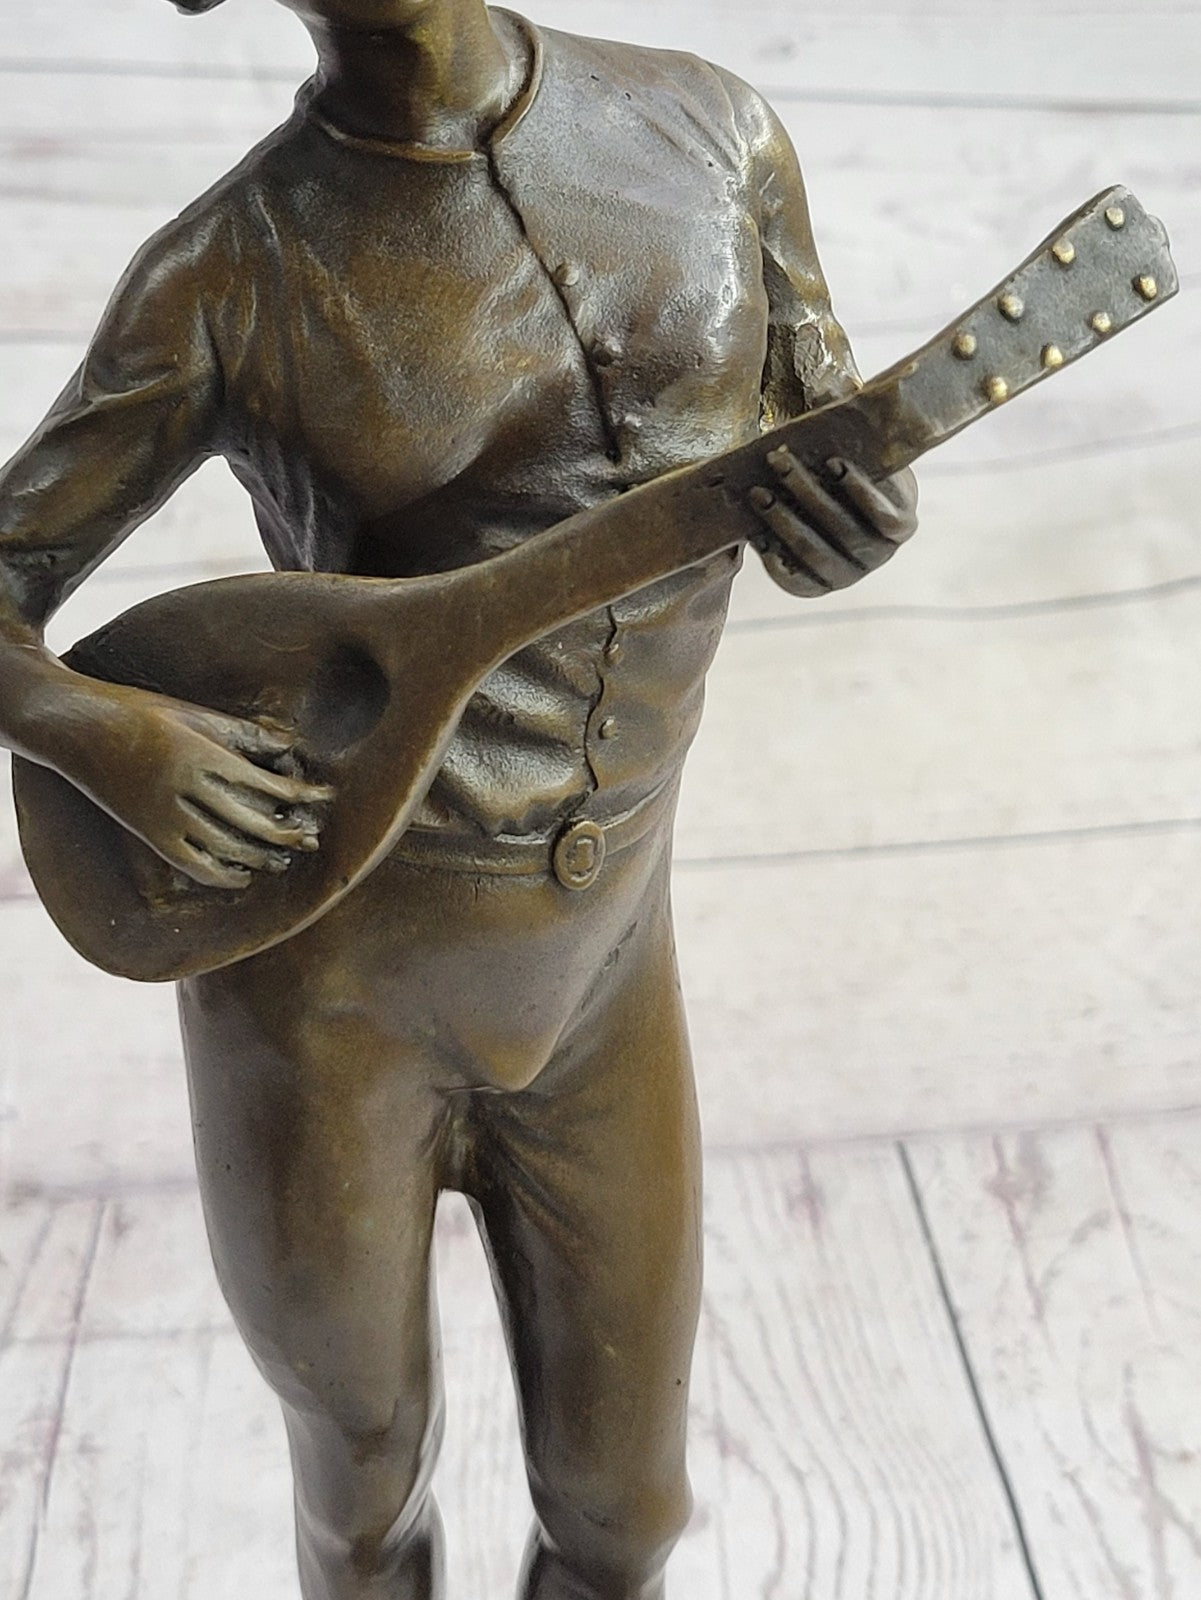 Handcrafted bronze sculpture SALE Debut By Player Banjo Deco Art Home Decor